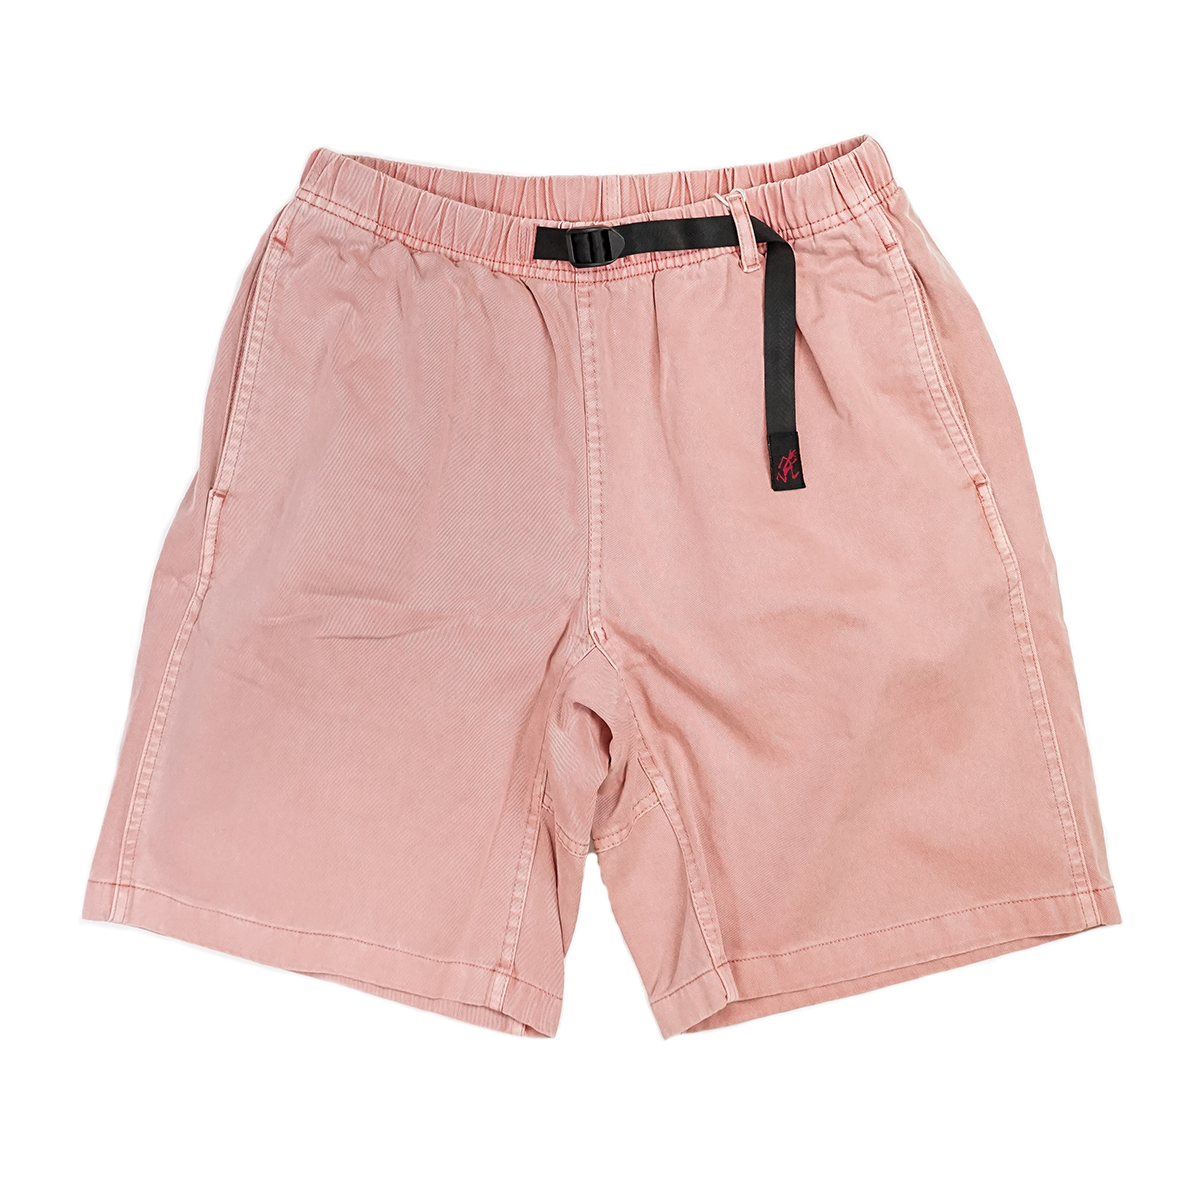 G-Short - Pigment Dyed - Coral